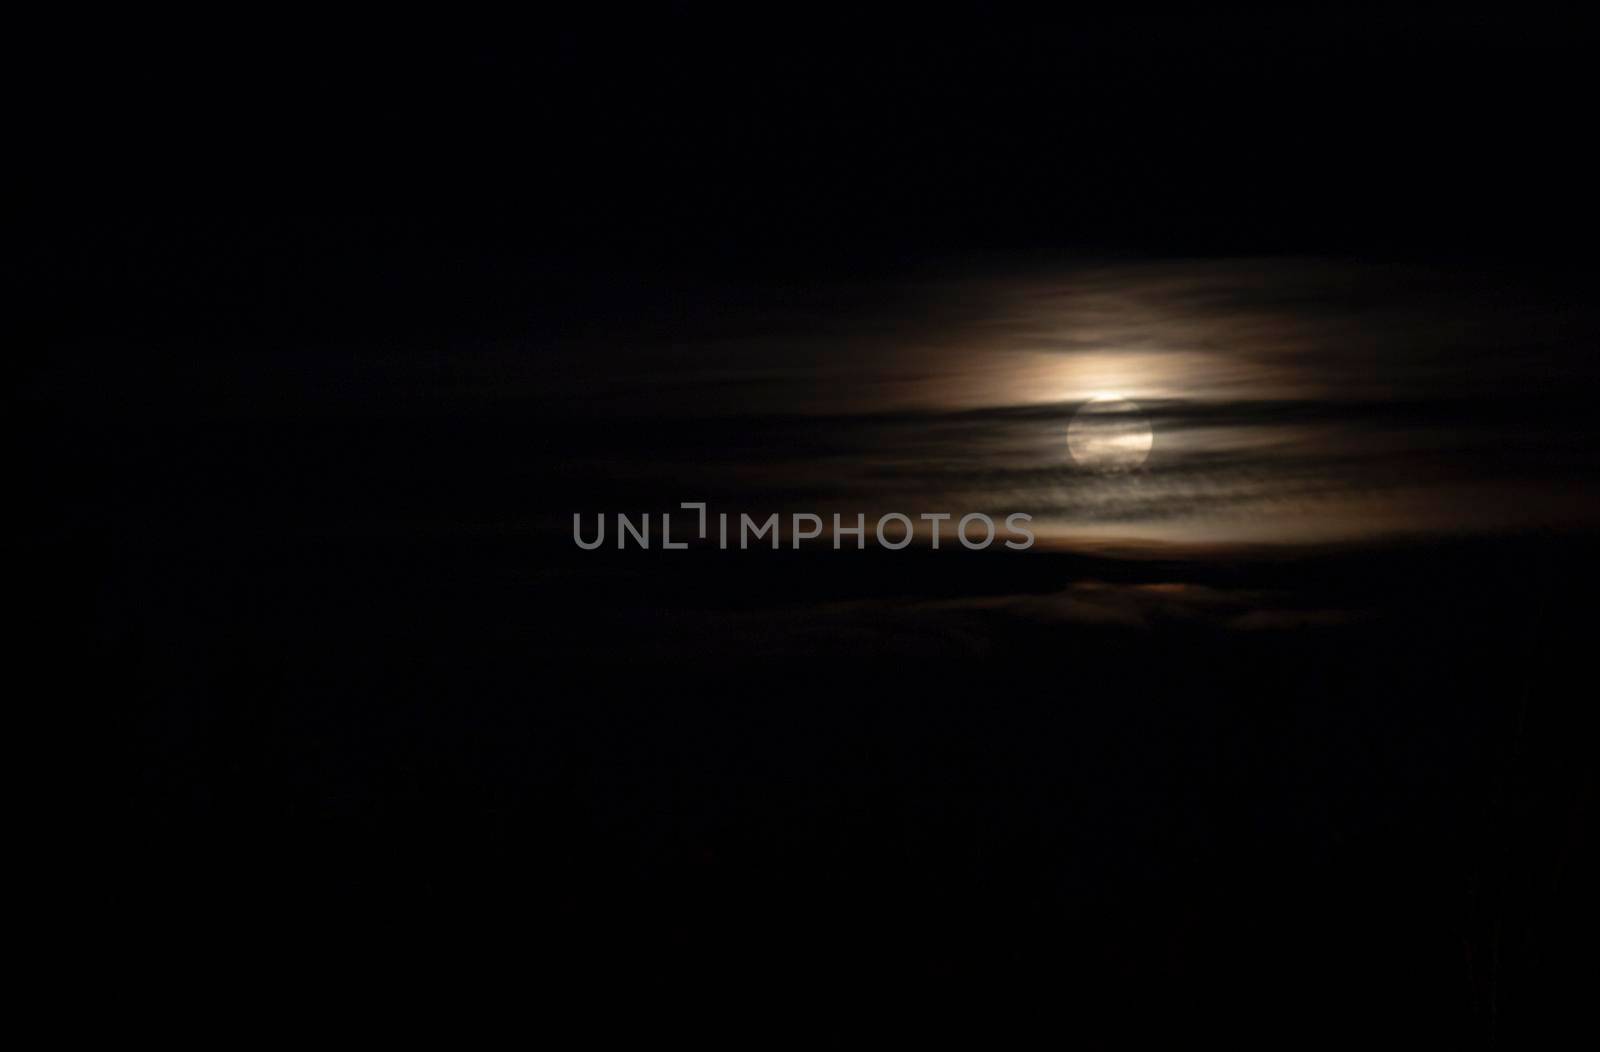 Full moon behind some clouds in a dark night